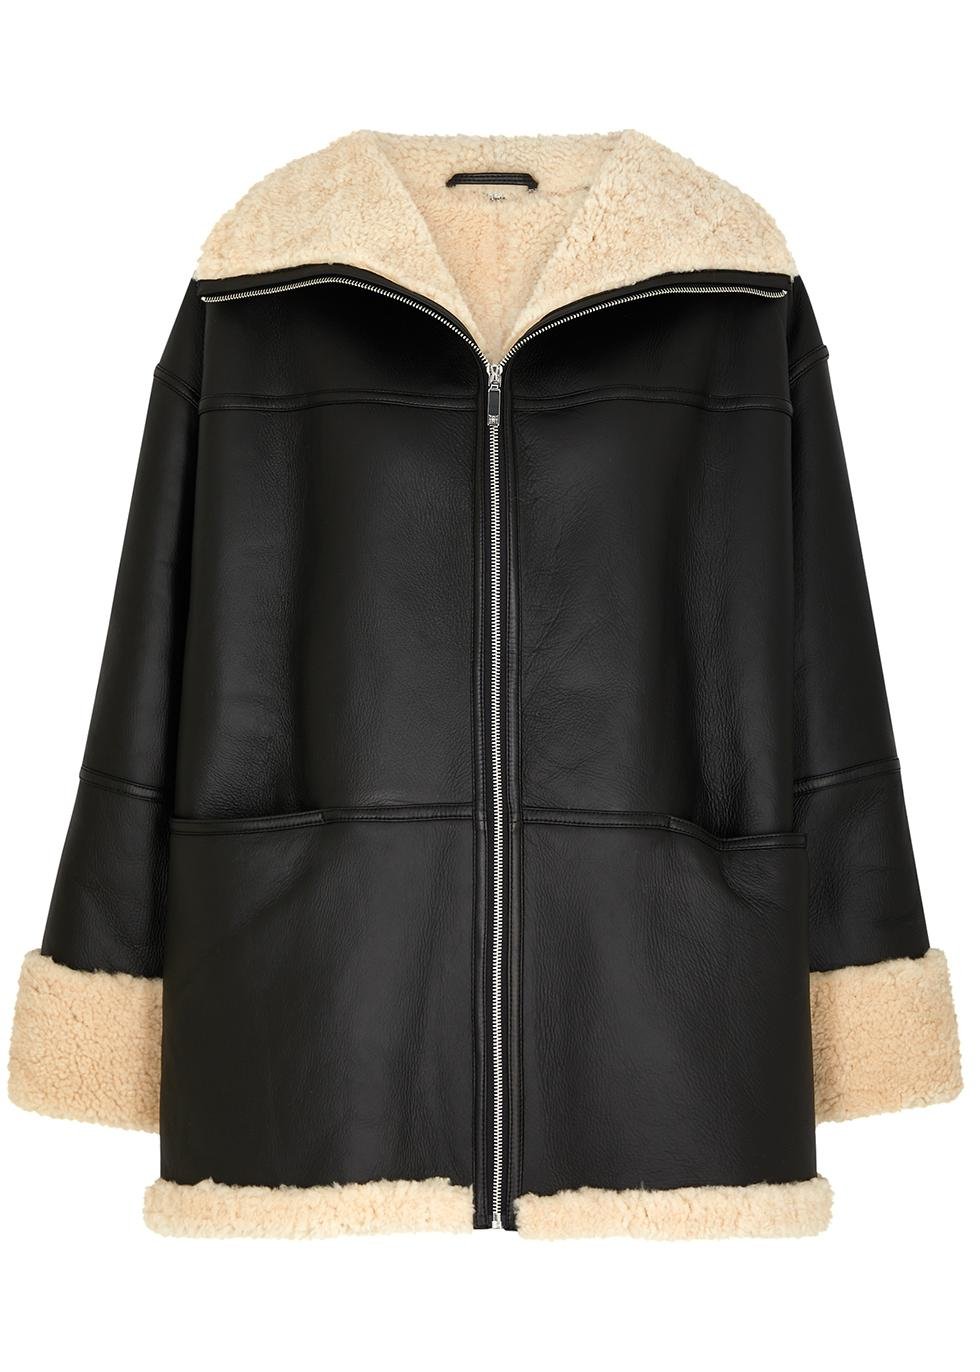 Signature shearling jacket by TOTEME | jellibeans